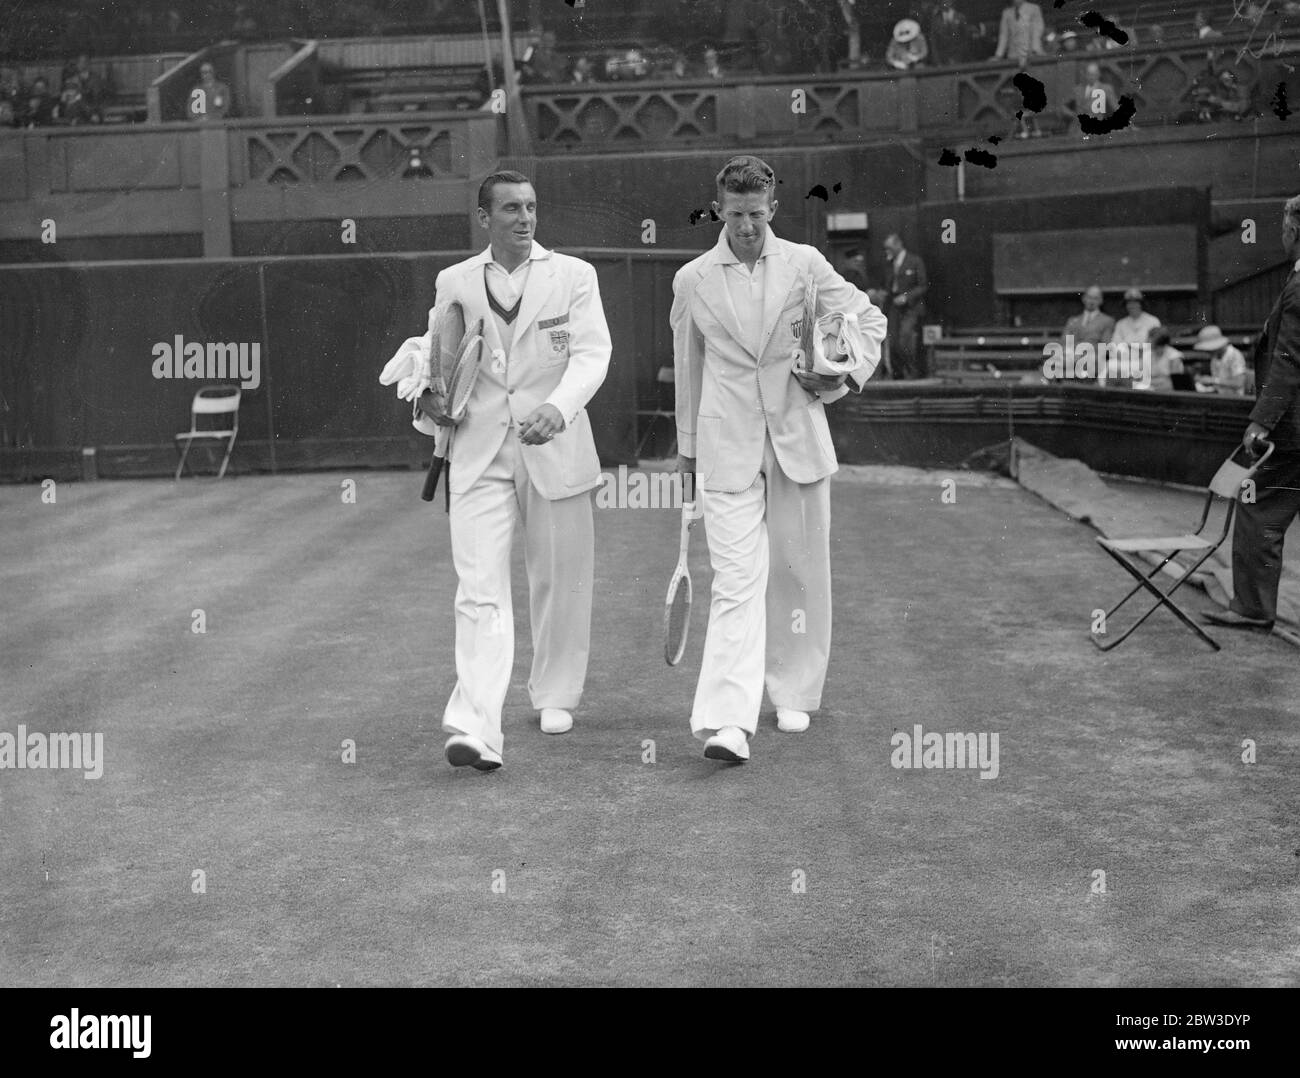 The challenge round of the Davis Cup . Fred Perry took the first set 6 - 0  when he played Don Budge in the second single match of the Davies Cup  challenge